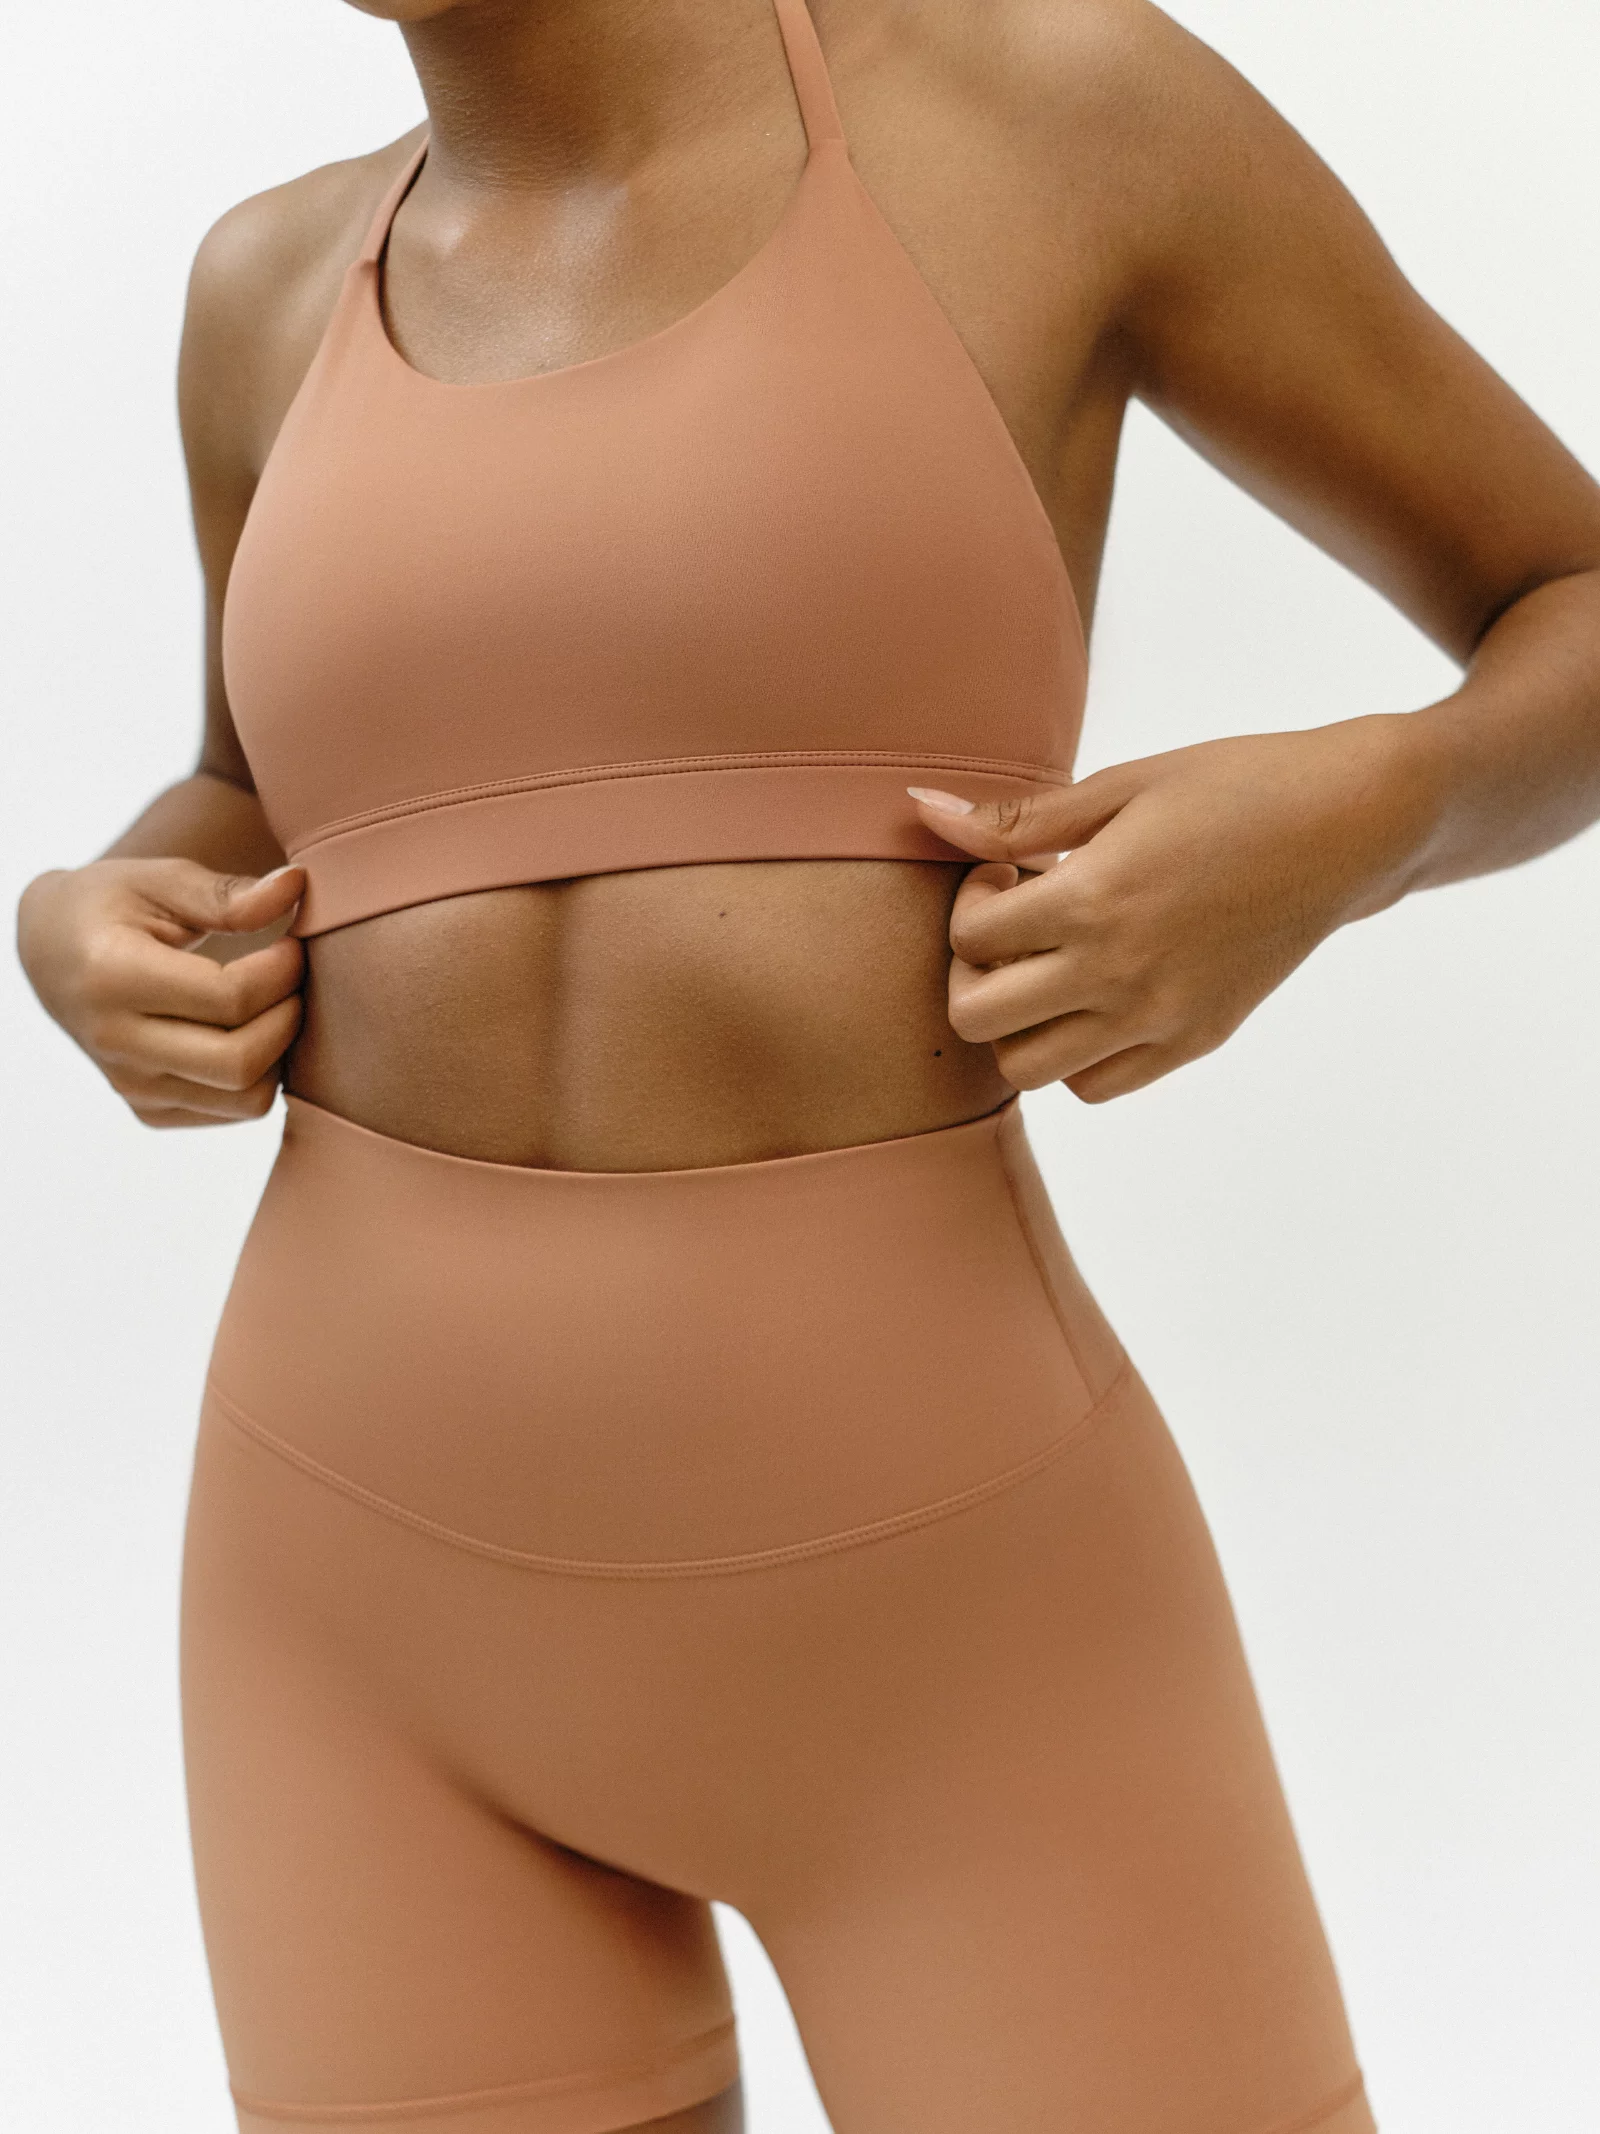 Licious-essentials - ANKO shock absorber sports bra, Available in size 42C  🔥🔥🔥🔥🔥 This sports bra is the truth🙌🏻, it gives full coverage and it  holds the boobs and prevents it from jumping